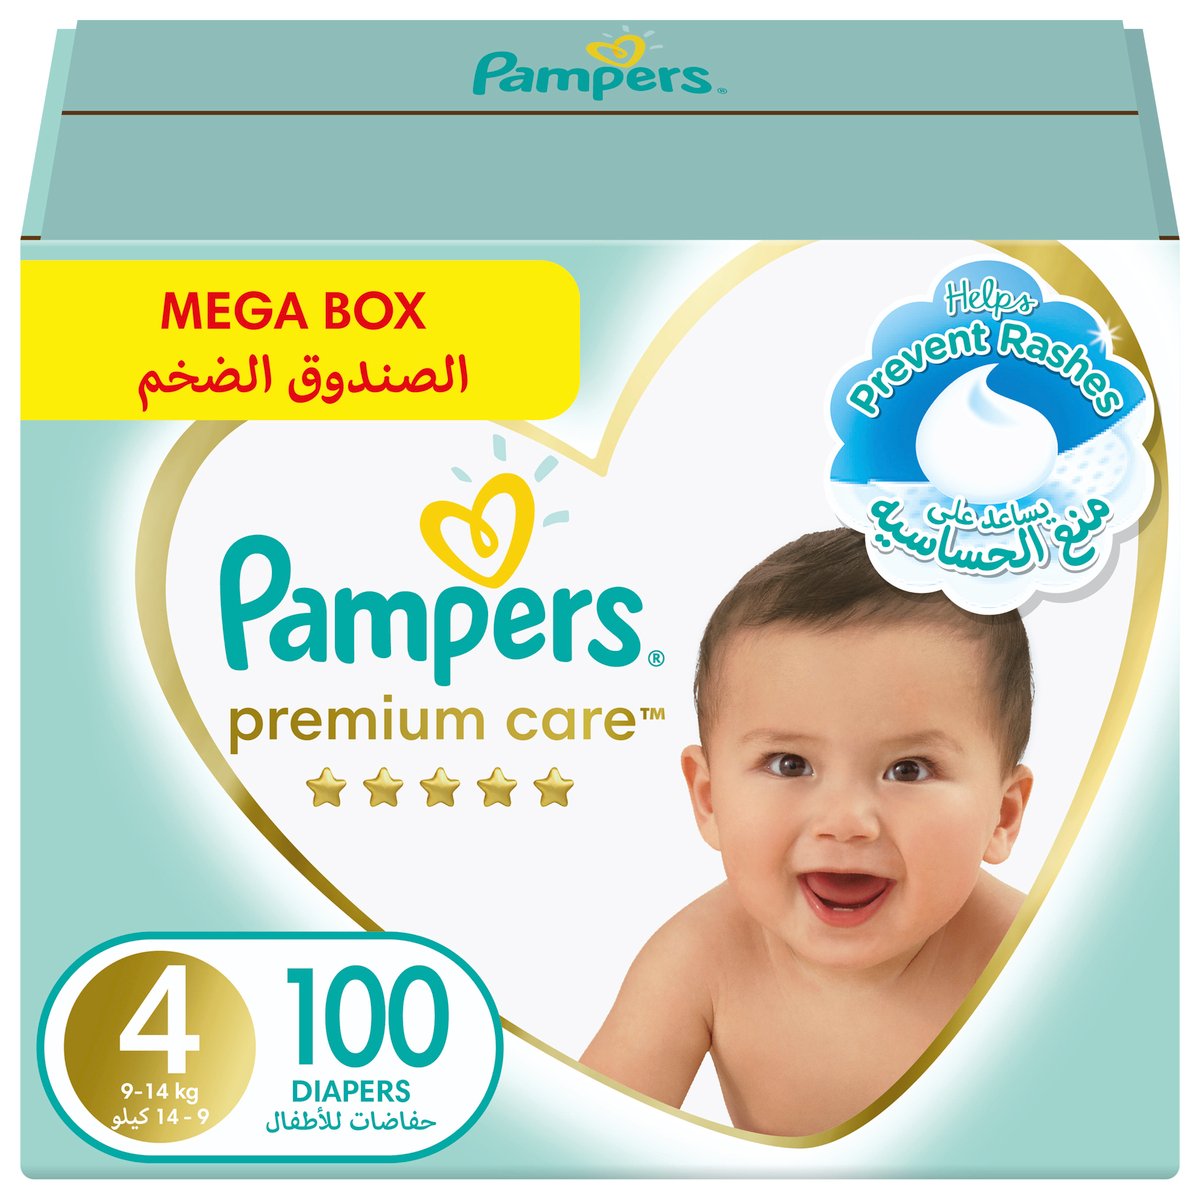 Pampers Premium Care Diapers Size 4, 9-14kg The Softest Diaper 100pcs